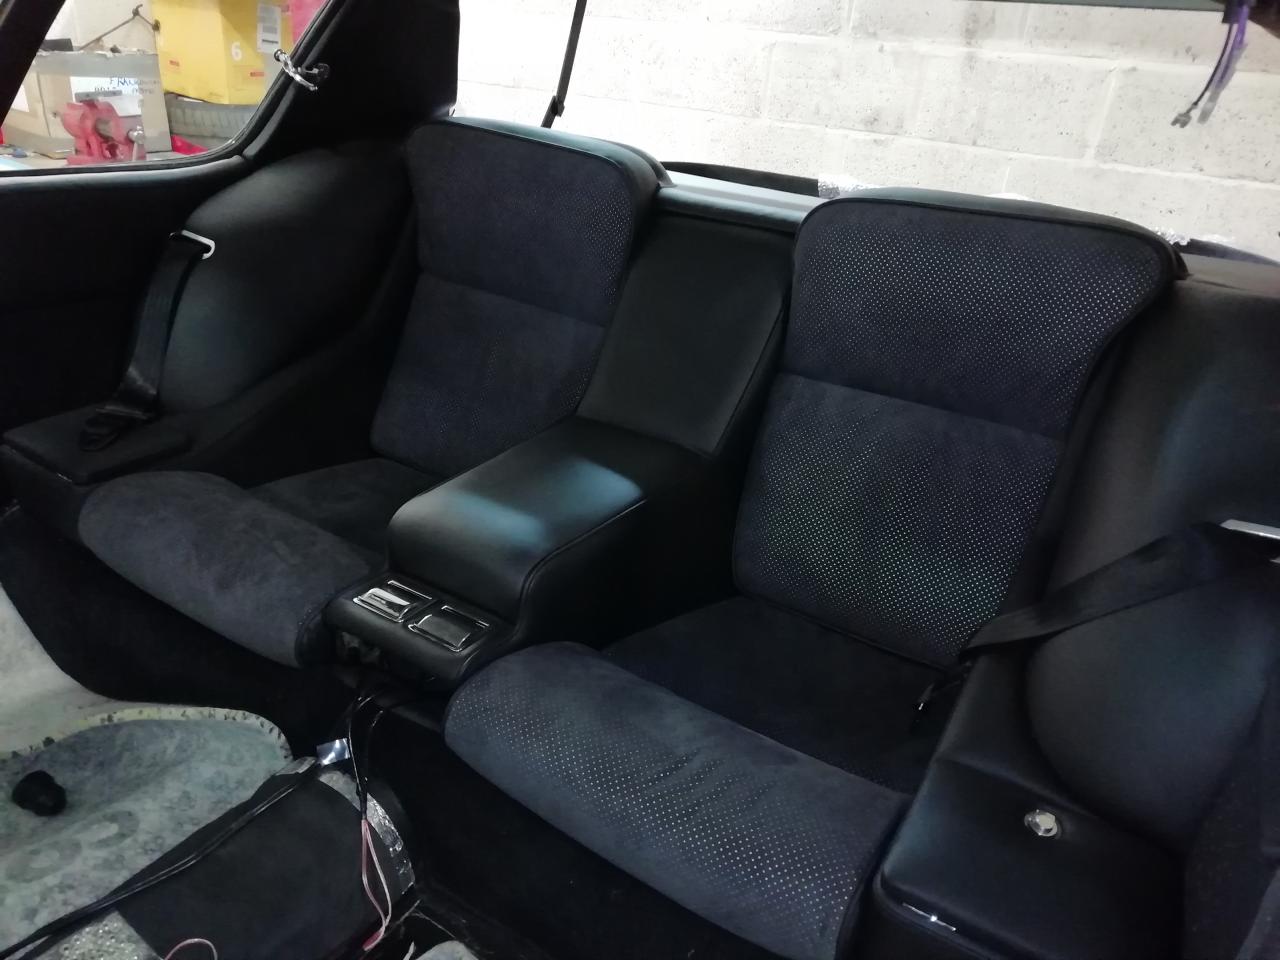 new rear seats fitted!